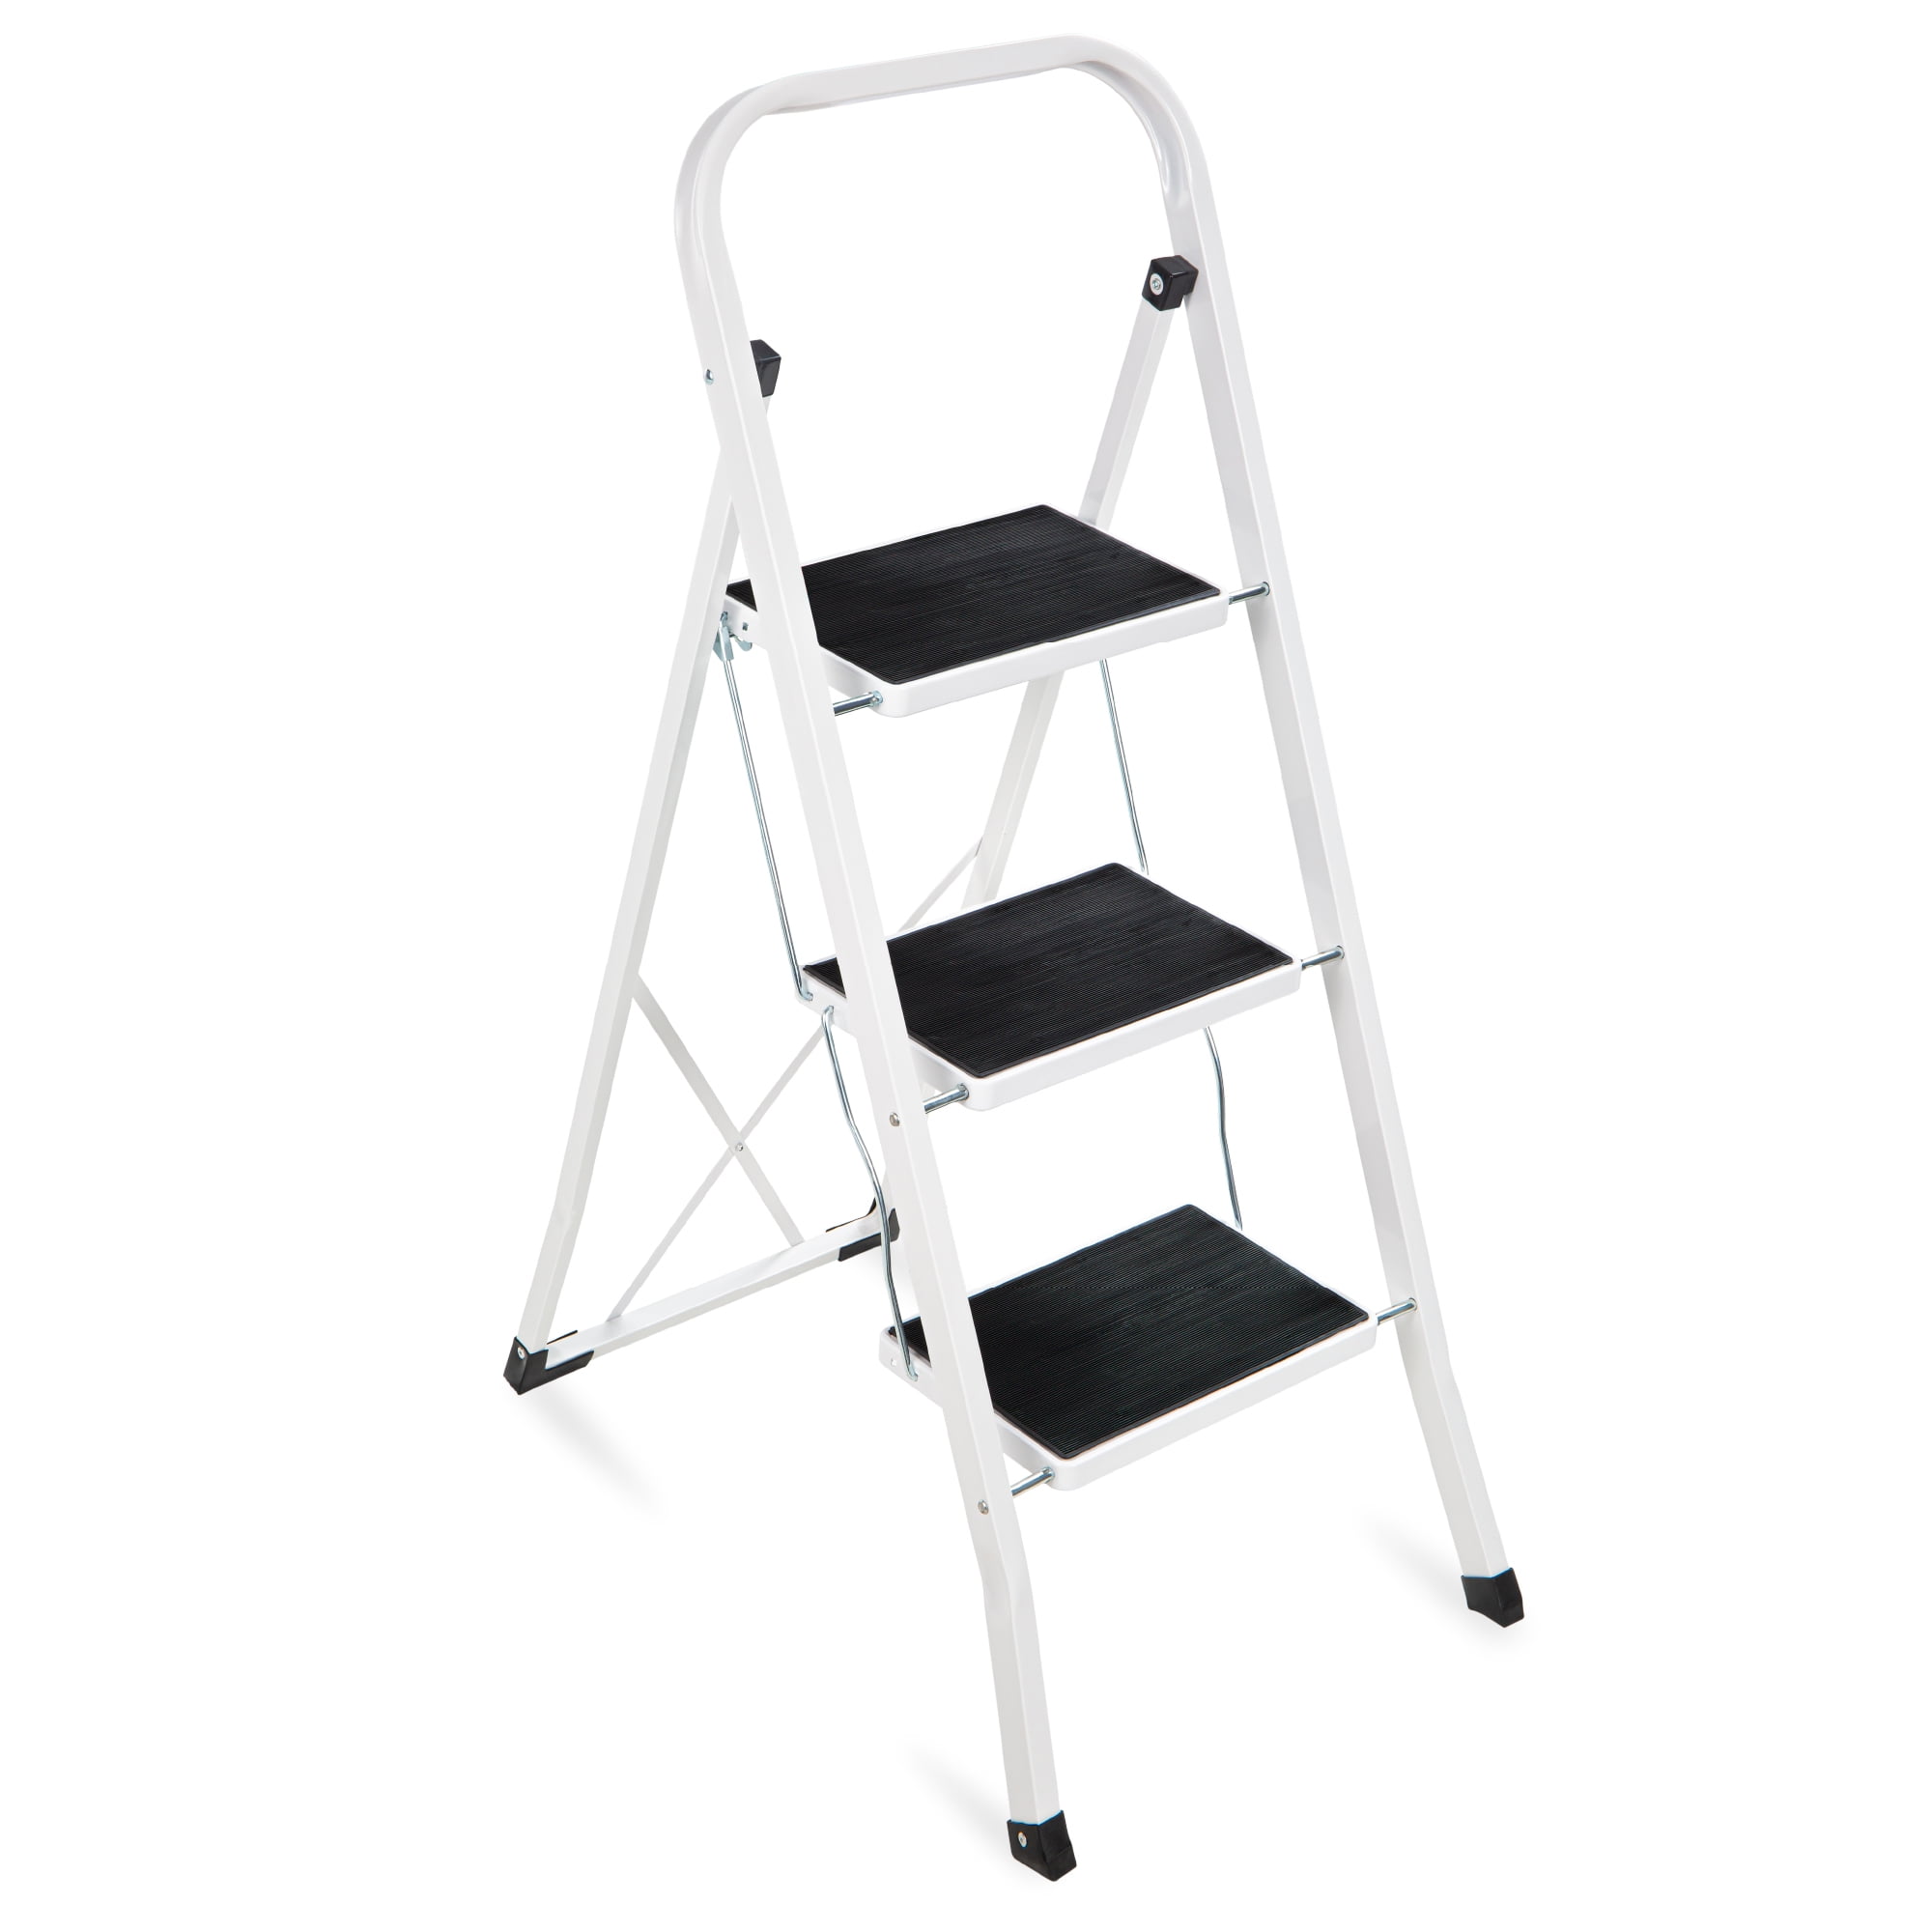 2 Step Stool Delxo 2 Step Stool Folding Step Stool Steel Stepladders with Handgrip Anti-Slip Sturdy and Wide Pedal Steel Ladder 330lbs White and Black Combo 2-Feet WK2061A-2